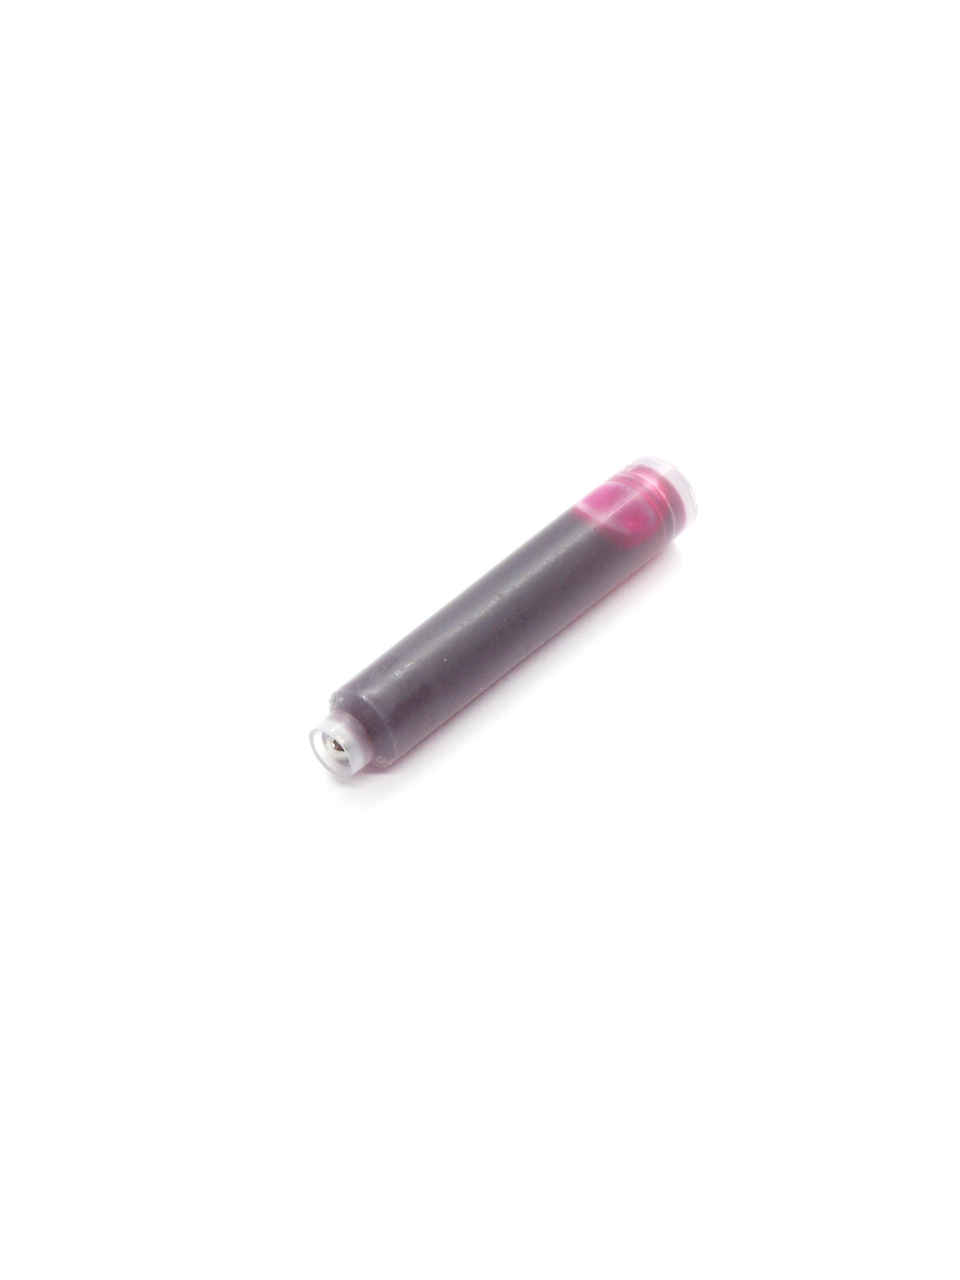 Cartridges For Jacques Herbin Fountain Pens (Pink)